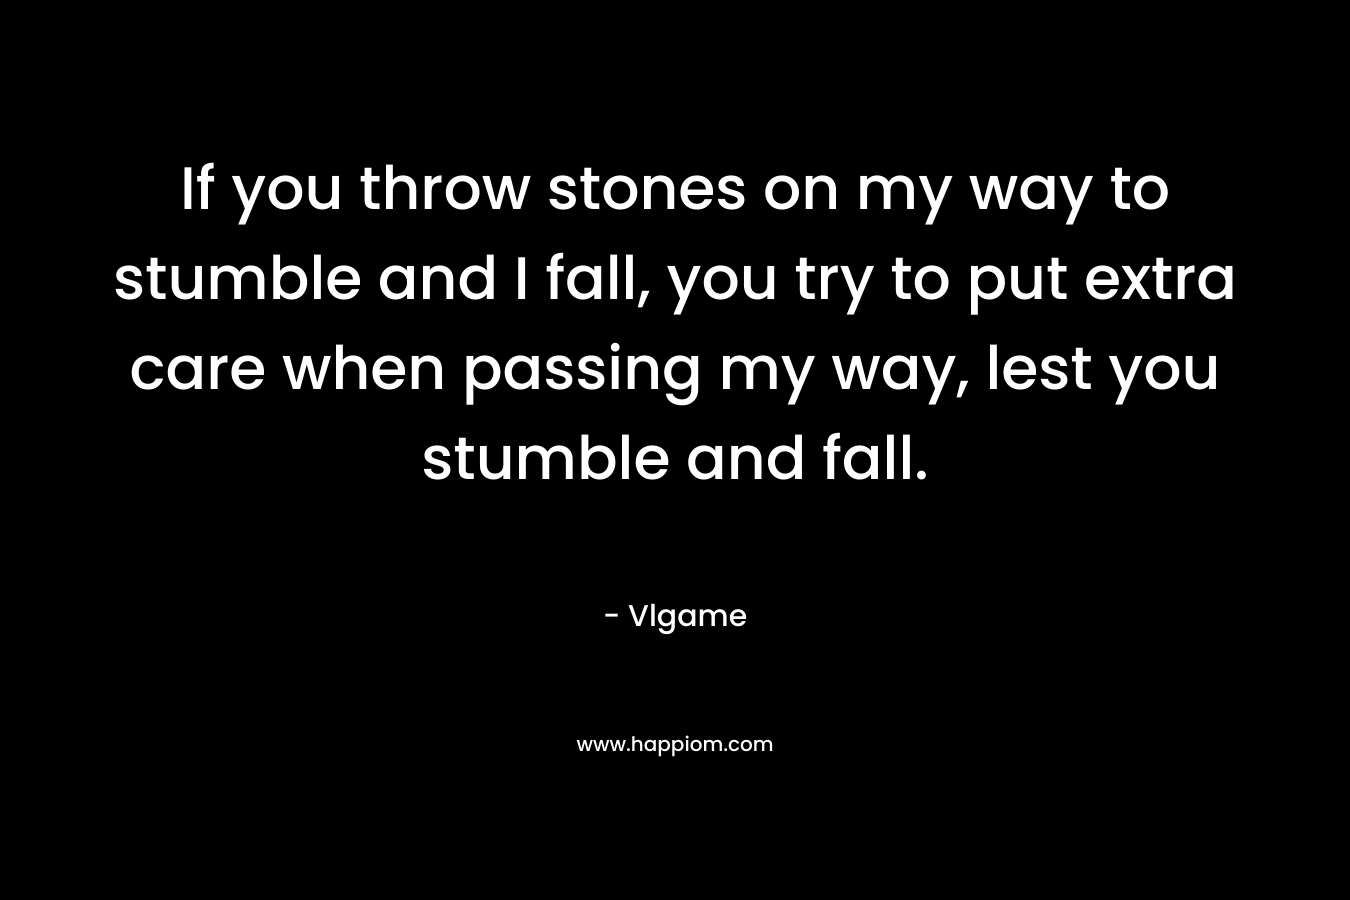 If you throw stones on my way to stumble and I fall, you try to put extra care when passing my way, lest you stumble and fall. – Vlgame